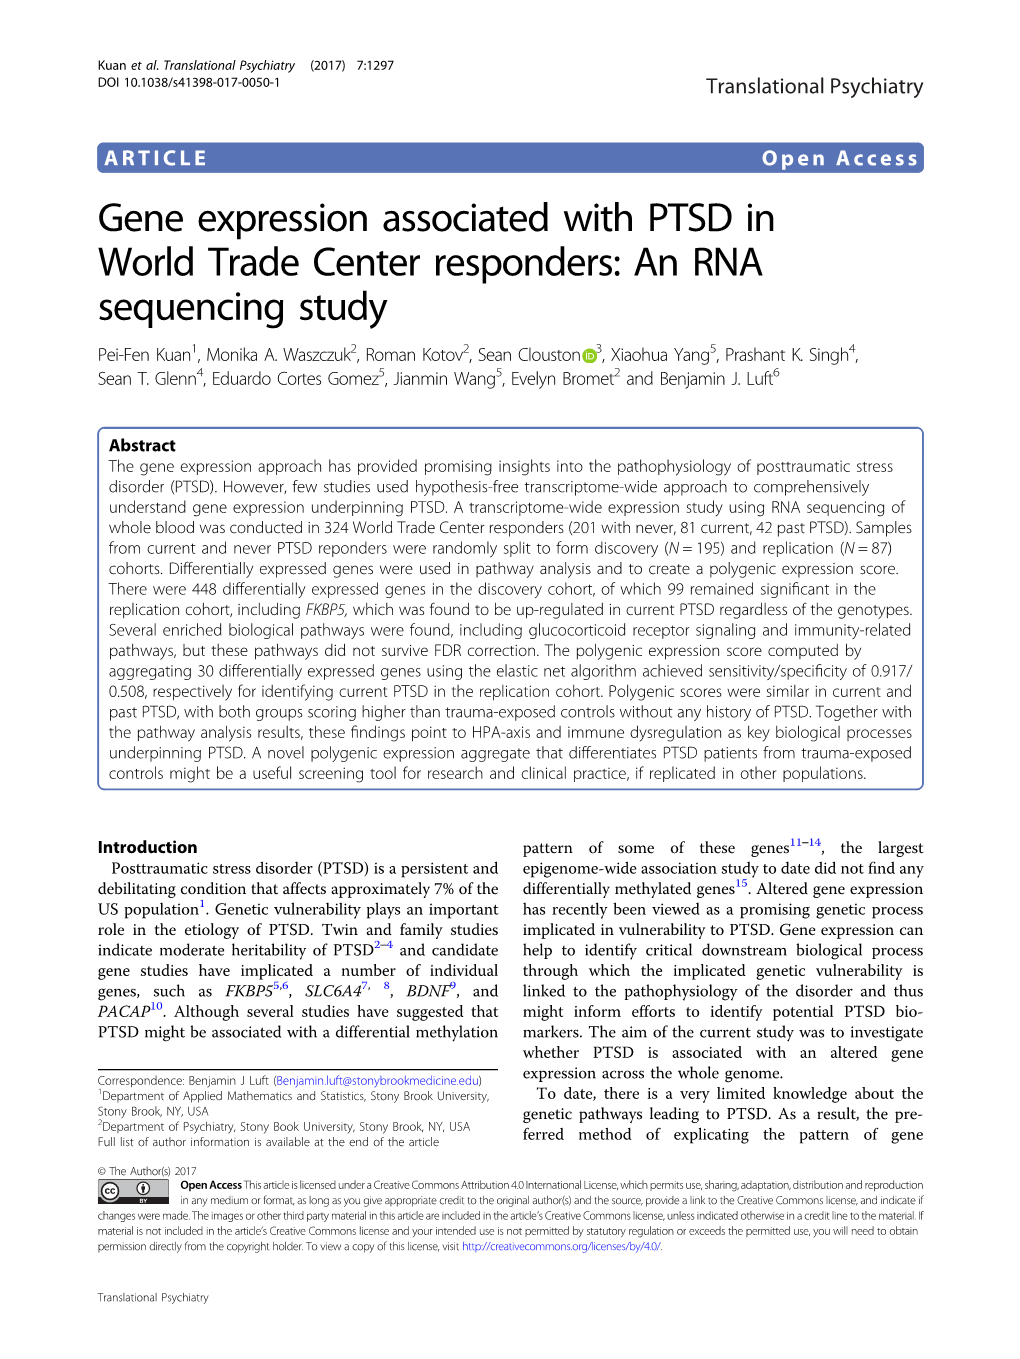 Gene Expression Associated with PTSD in World Trade Center Responders: an RNA Sequencing Study Pei-Fen Kuan1, Monika A